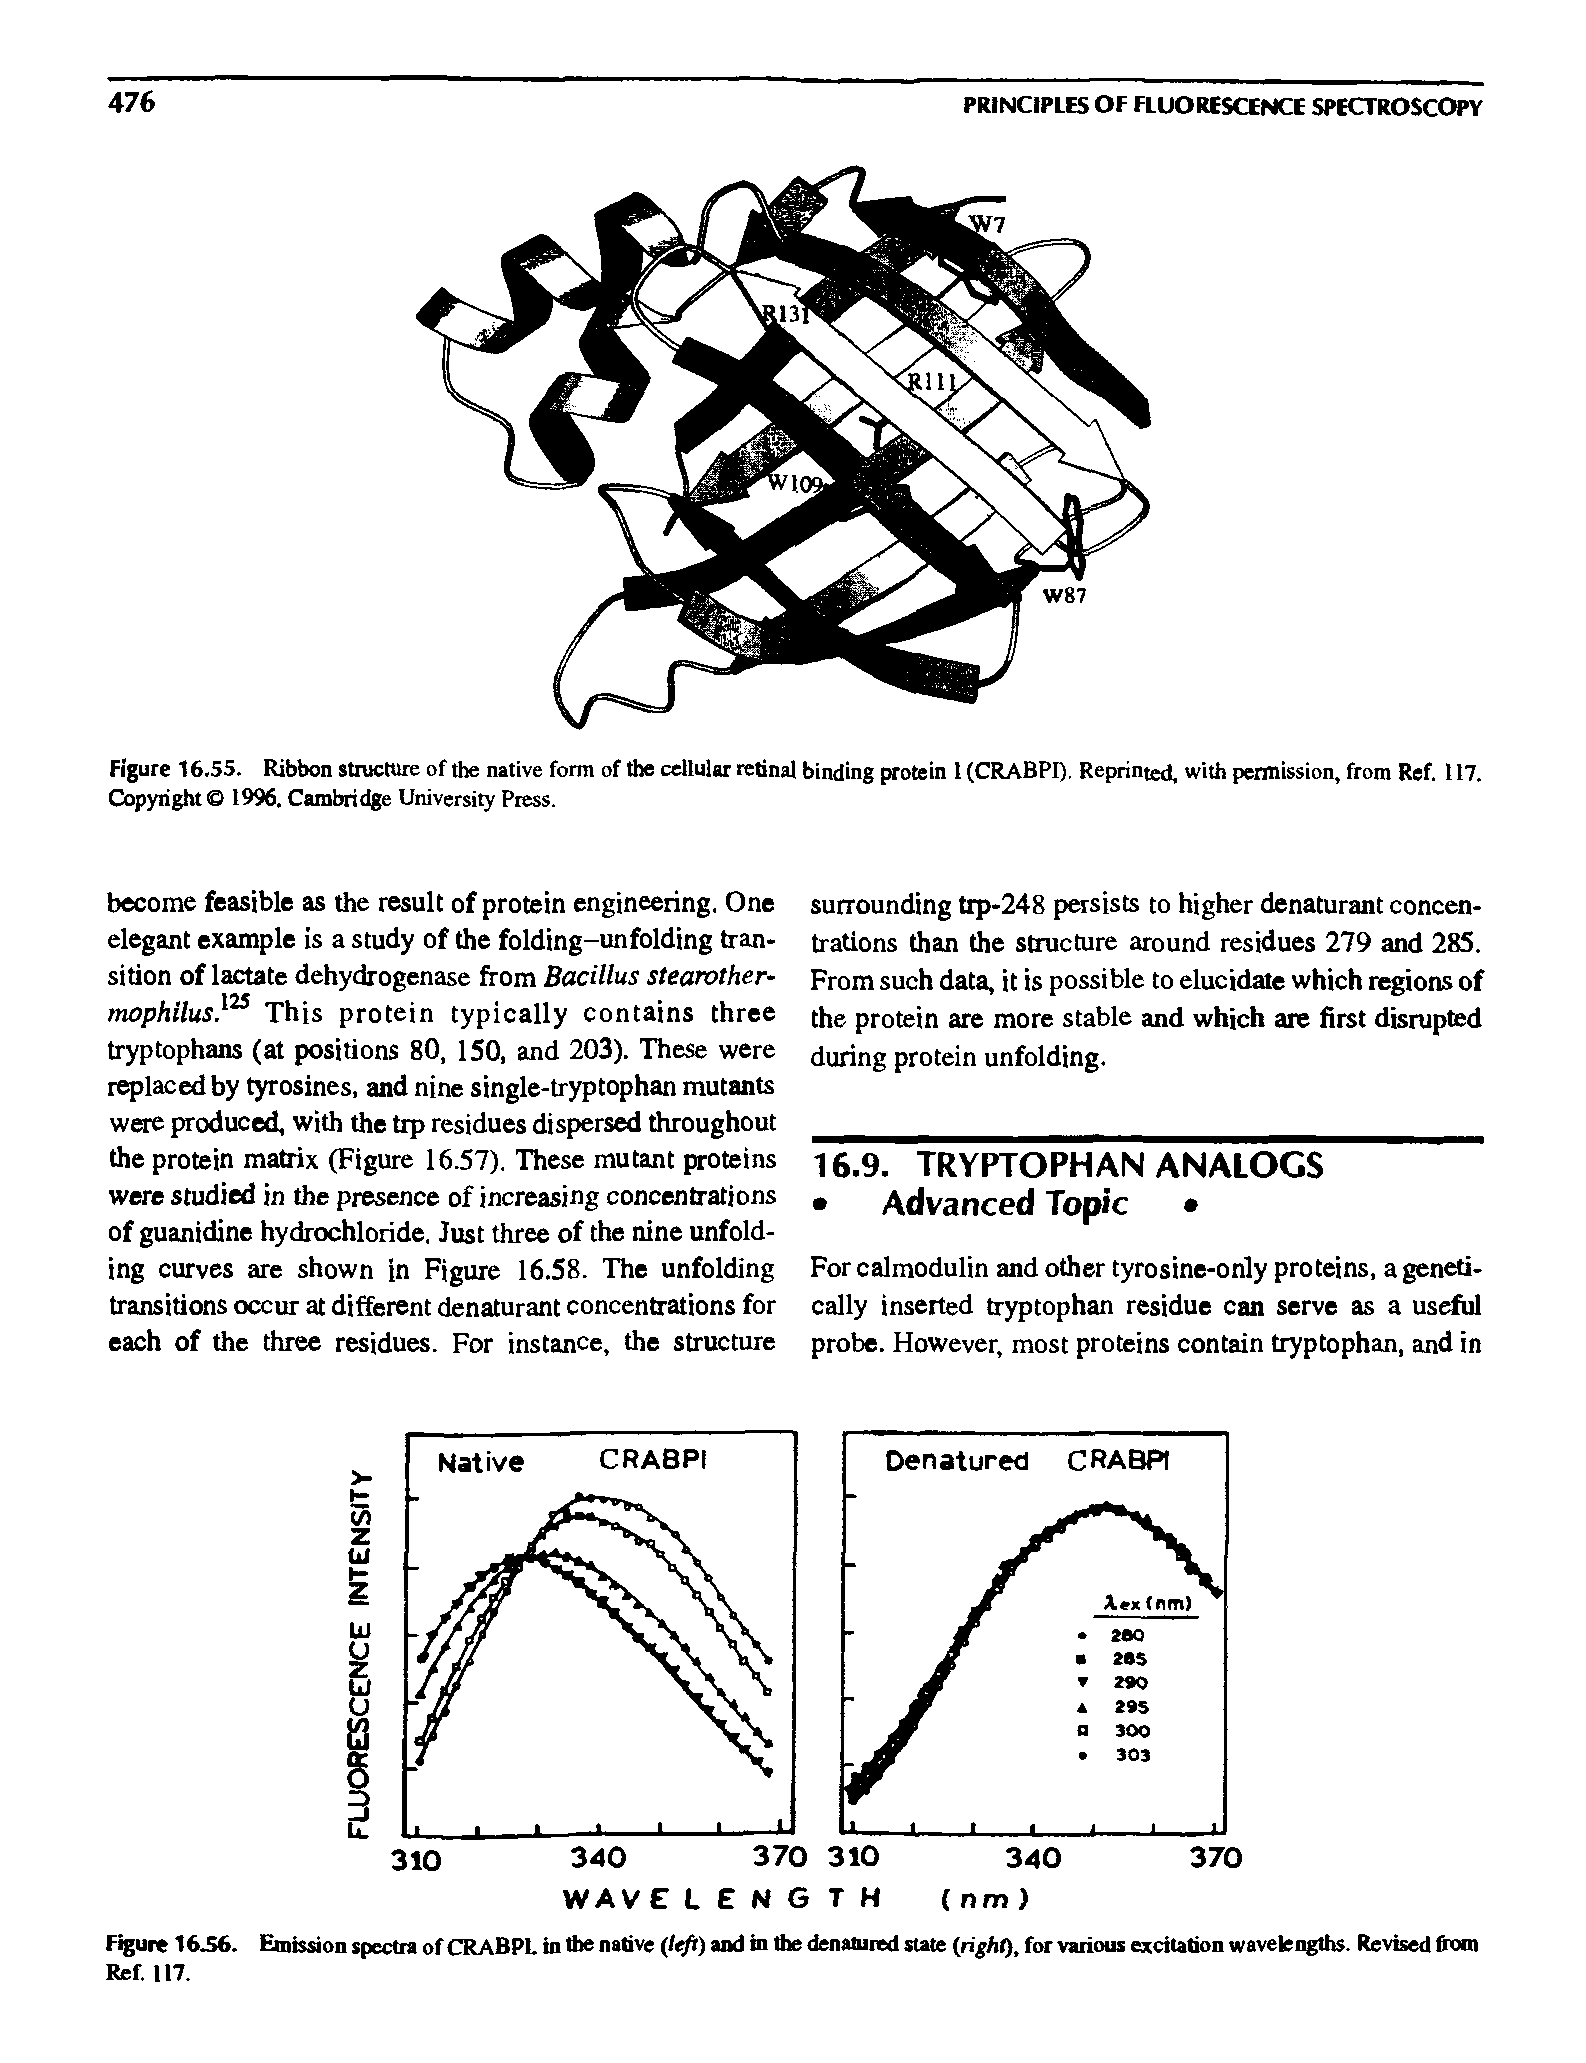 Figure 16.55. Ribbon structure of the native form of the cellular retinal binding protein l(CRABPI), Reprinted, with permission, from Ref. 117. Copyright 1996. Cambridge University Press.